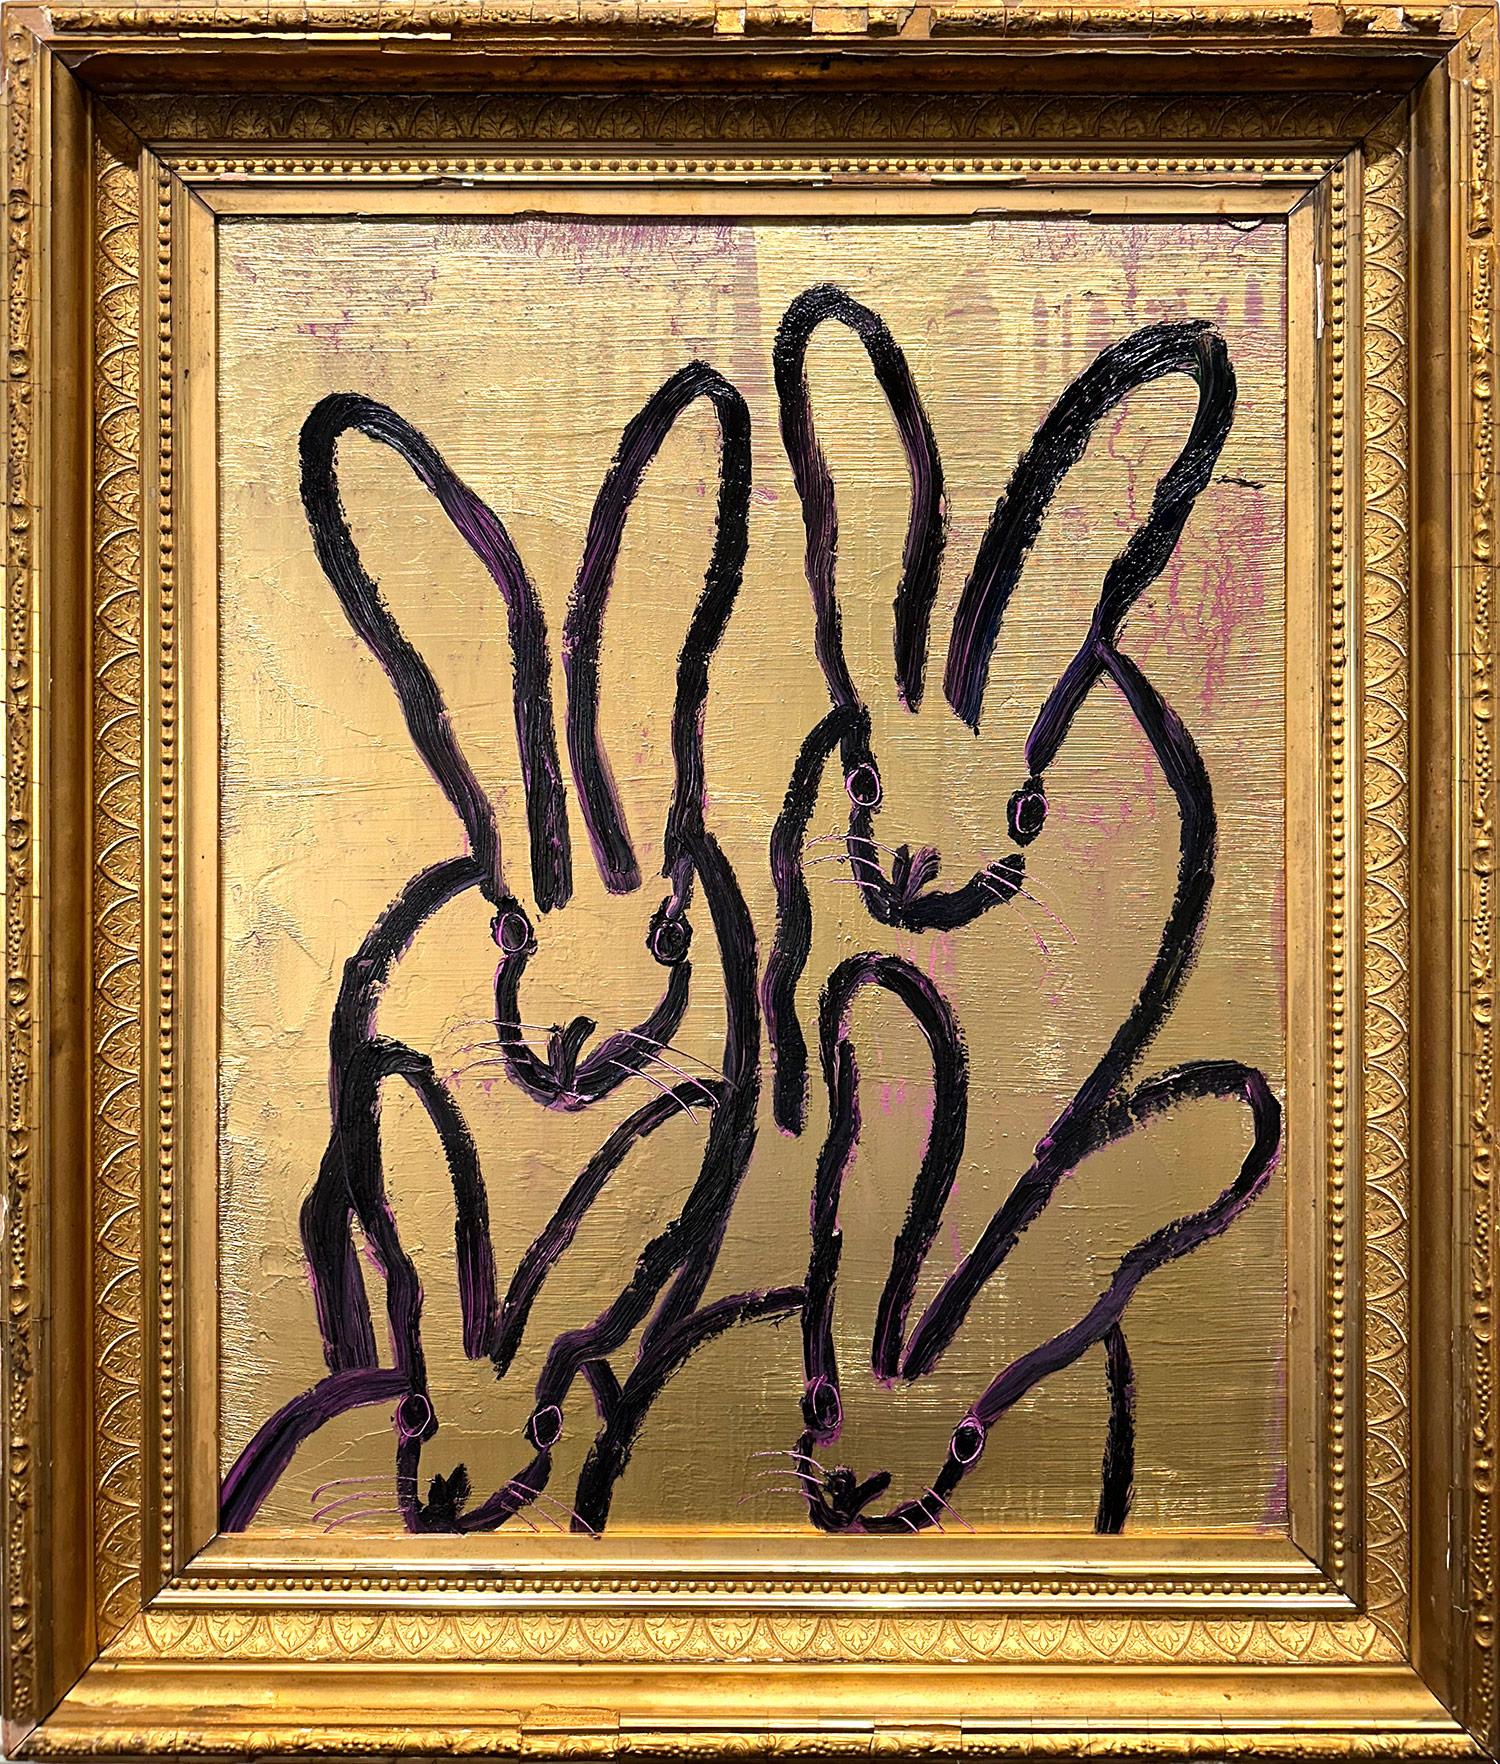 Hunt Slonem Abstract Painting - "4 Play More" Black Bunnies on Gold Background with Pink Accents Oil on Wood